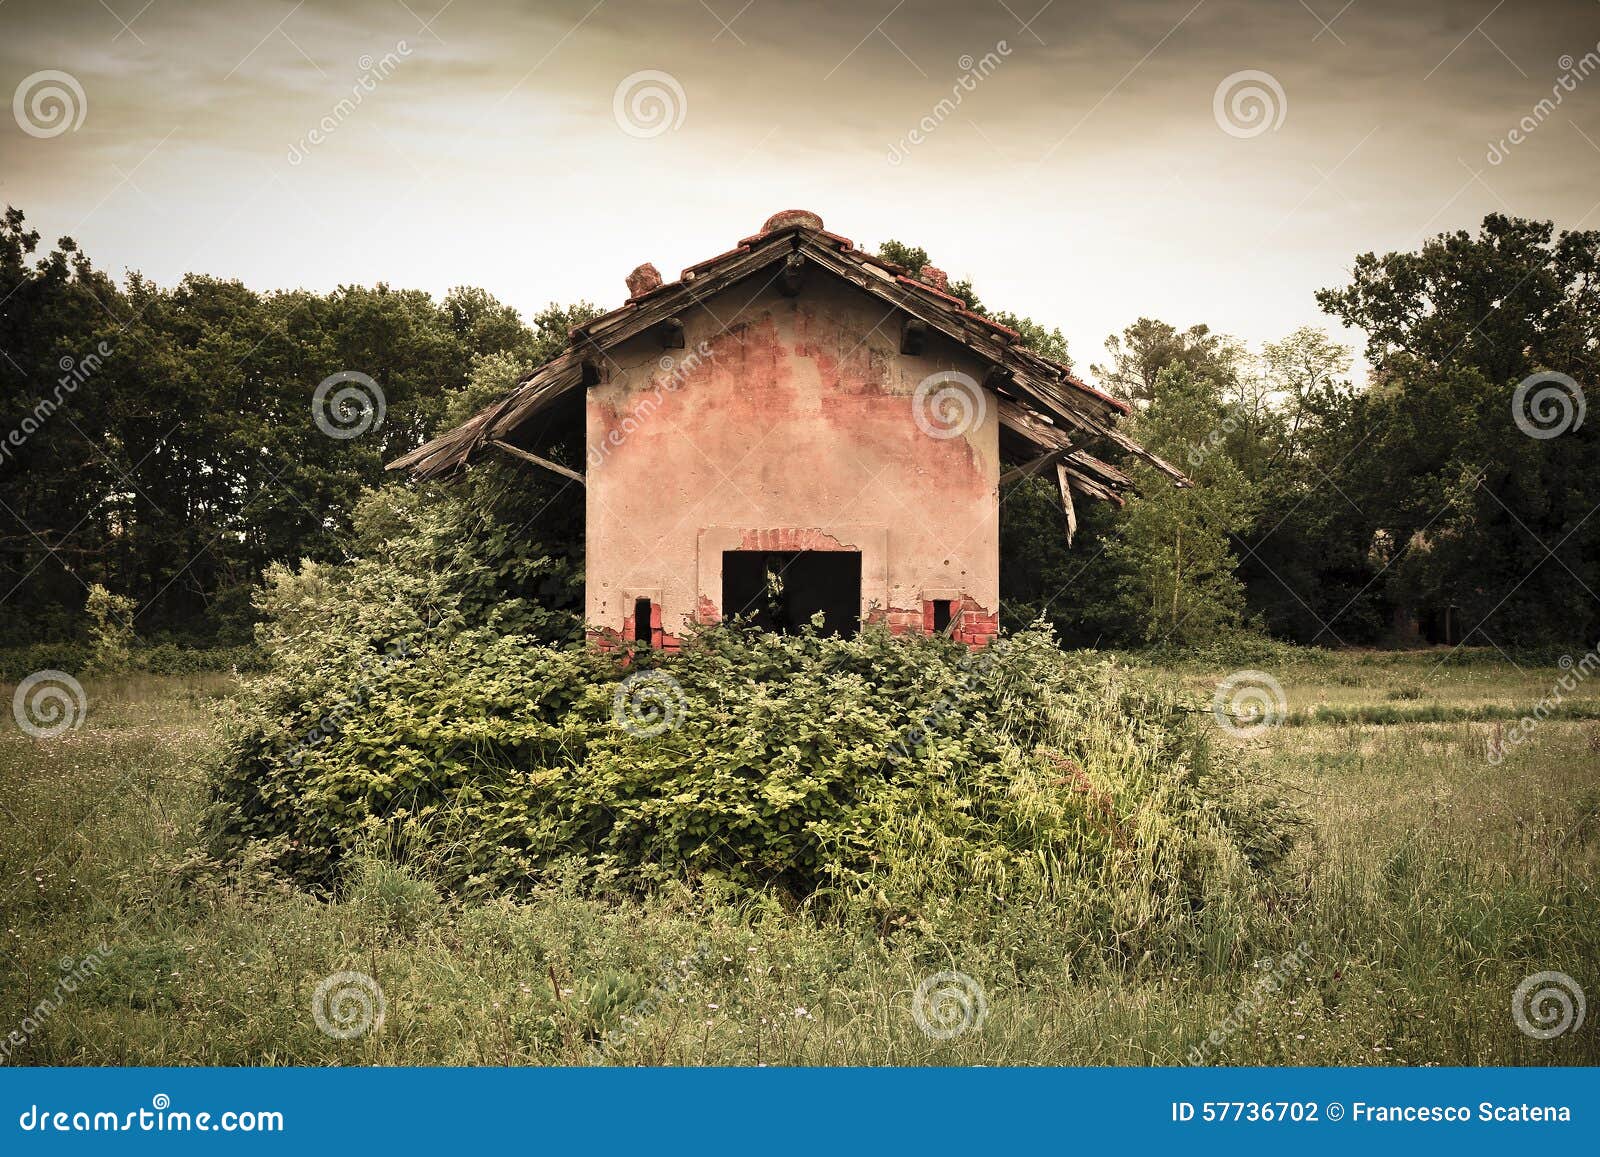 Old Abandoned Farm Structures Stock Photo - Image of regret, italy ...